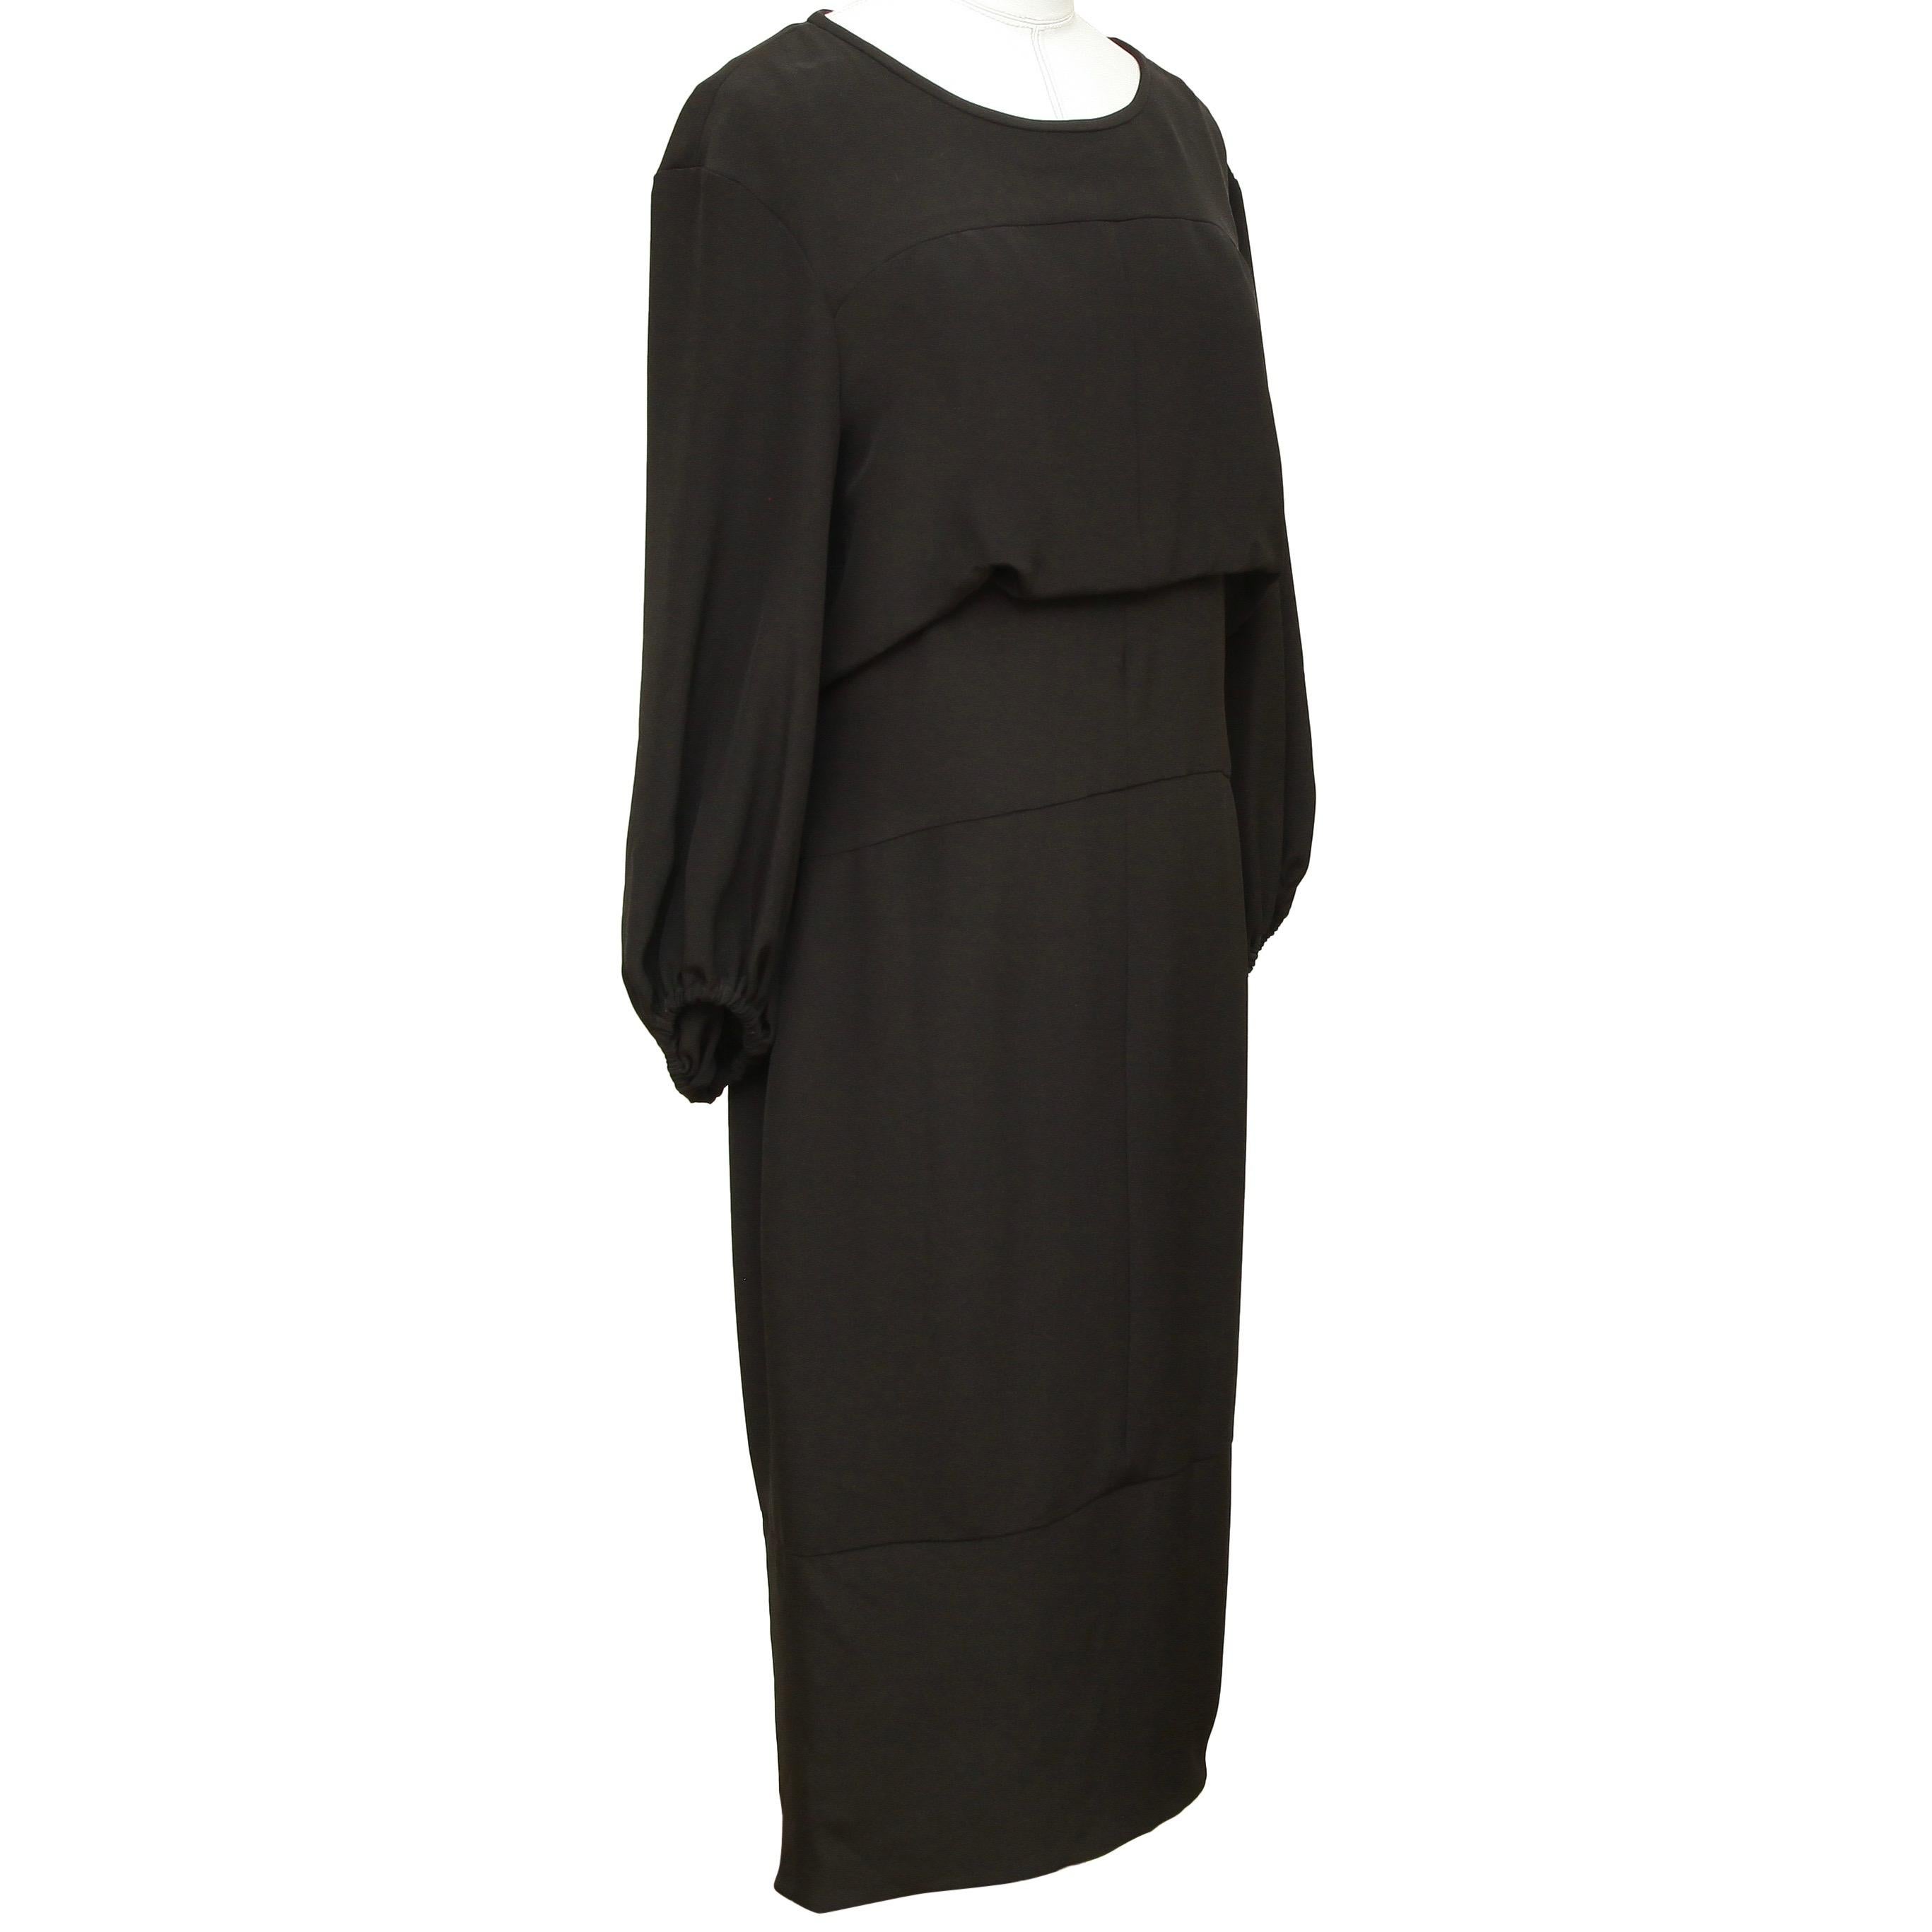 GUARANTEED AUTHENTIC CHANEL 2012 BLACK SILK 3/4 SLEEVE DRESS

Design:
- Black silk shift dress.
- 3/4 Sleeve.
- Elastic at arms.
- Bateau neck.
- Fully lined.
- Comes with extra fabric swatch.

Material: 100% Silk; 100% Silk Lining

Size: